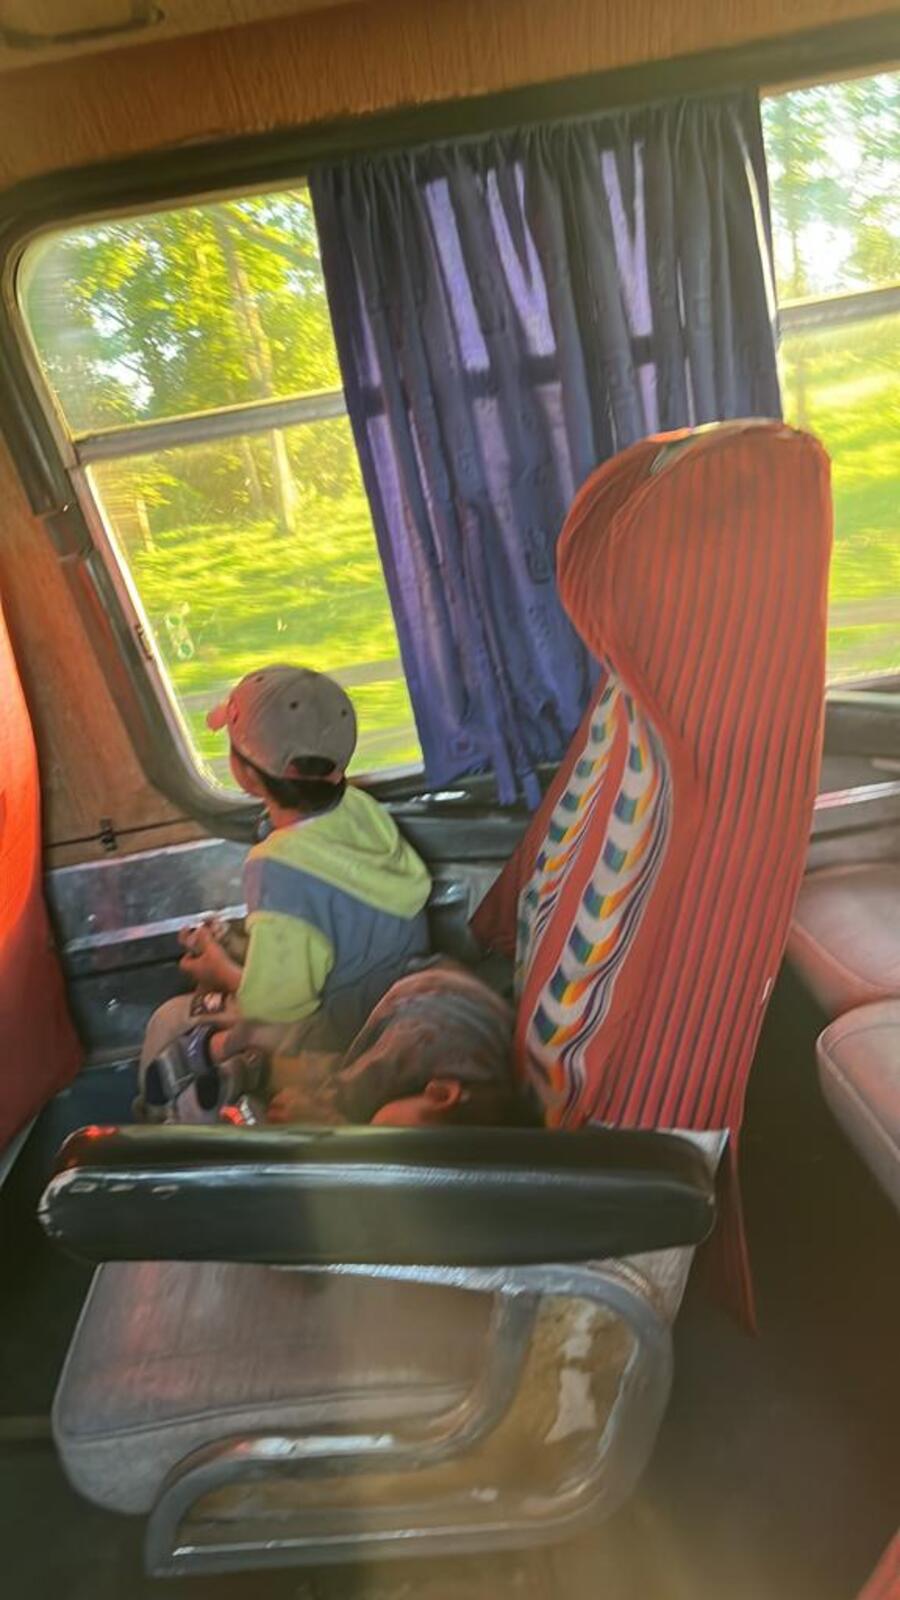 Two children riding on a bus. One is sitting up and looking out the window while the other is nestled beside him on the seat.